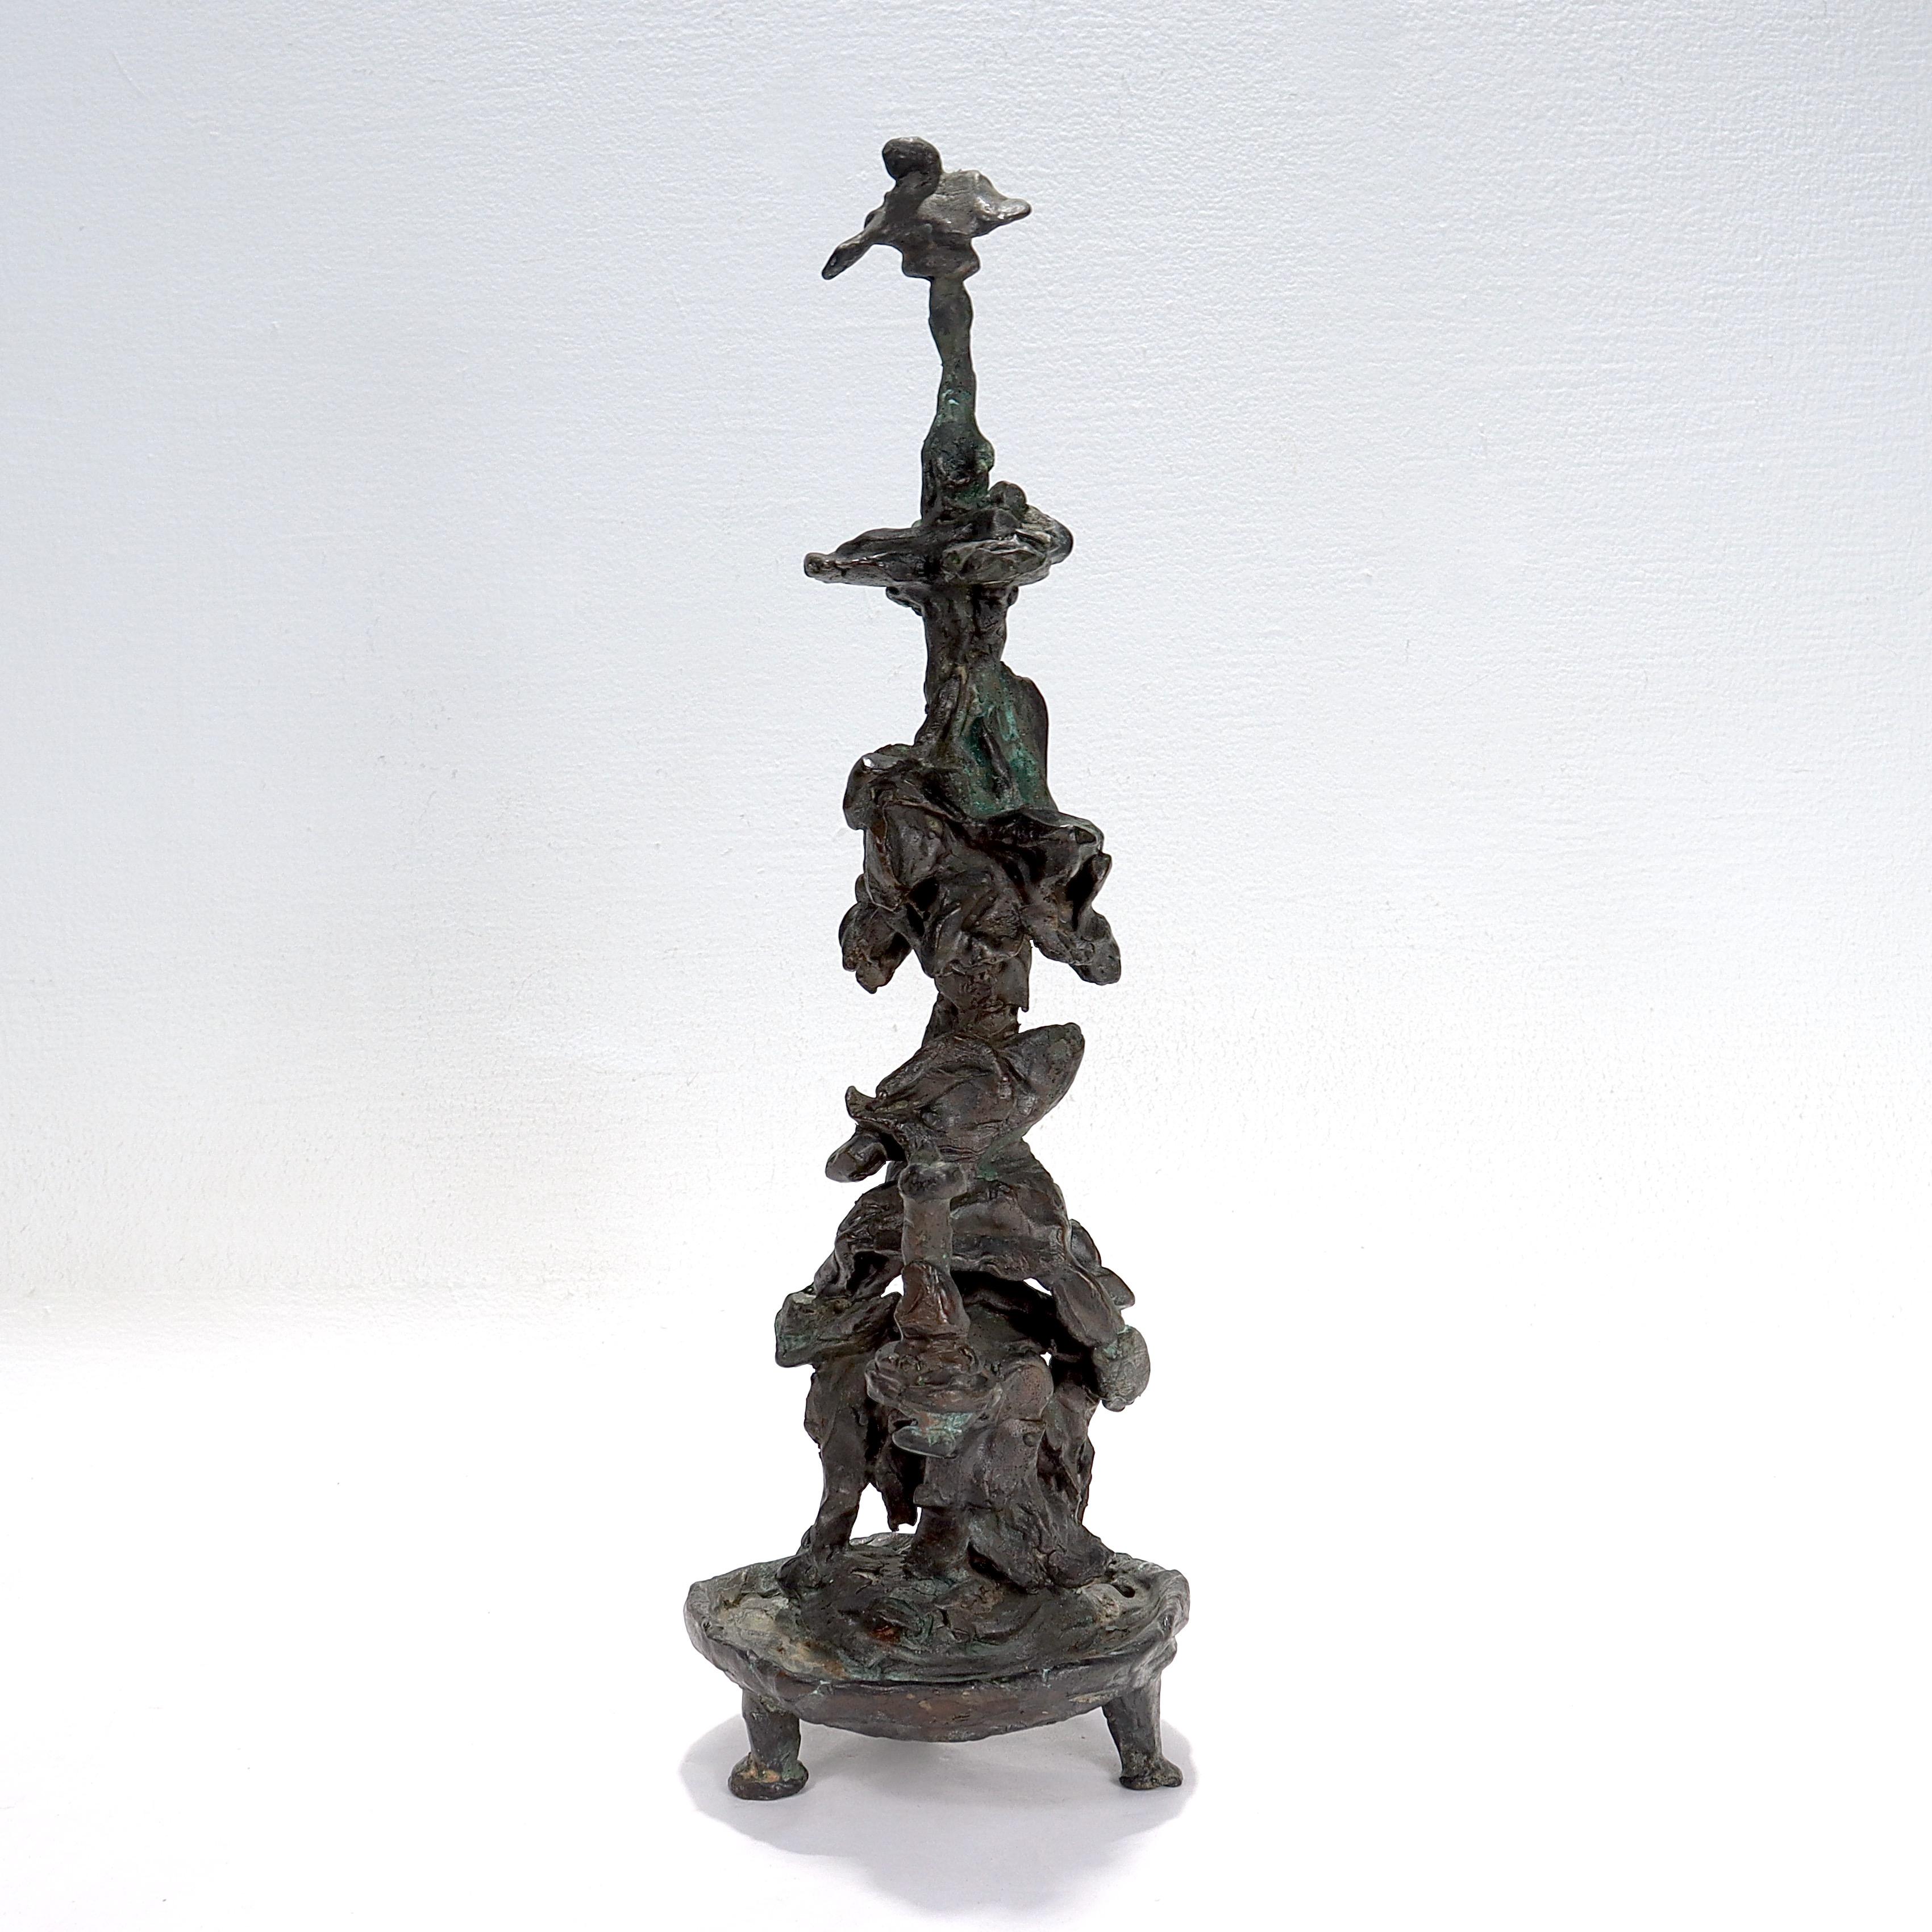 A fine mid-century bronze sculpture.

In the form of a stylized totem. 

With a round plinth supported by 3 legs (and thus a little prone to tipping).

Simply a wonderful sculpture! 

Date:
mid to late 20th century

Marks: 
Apparently